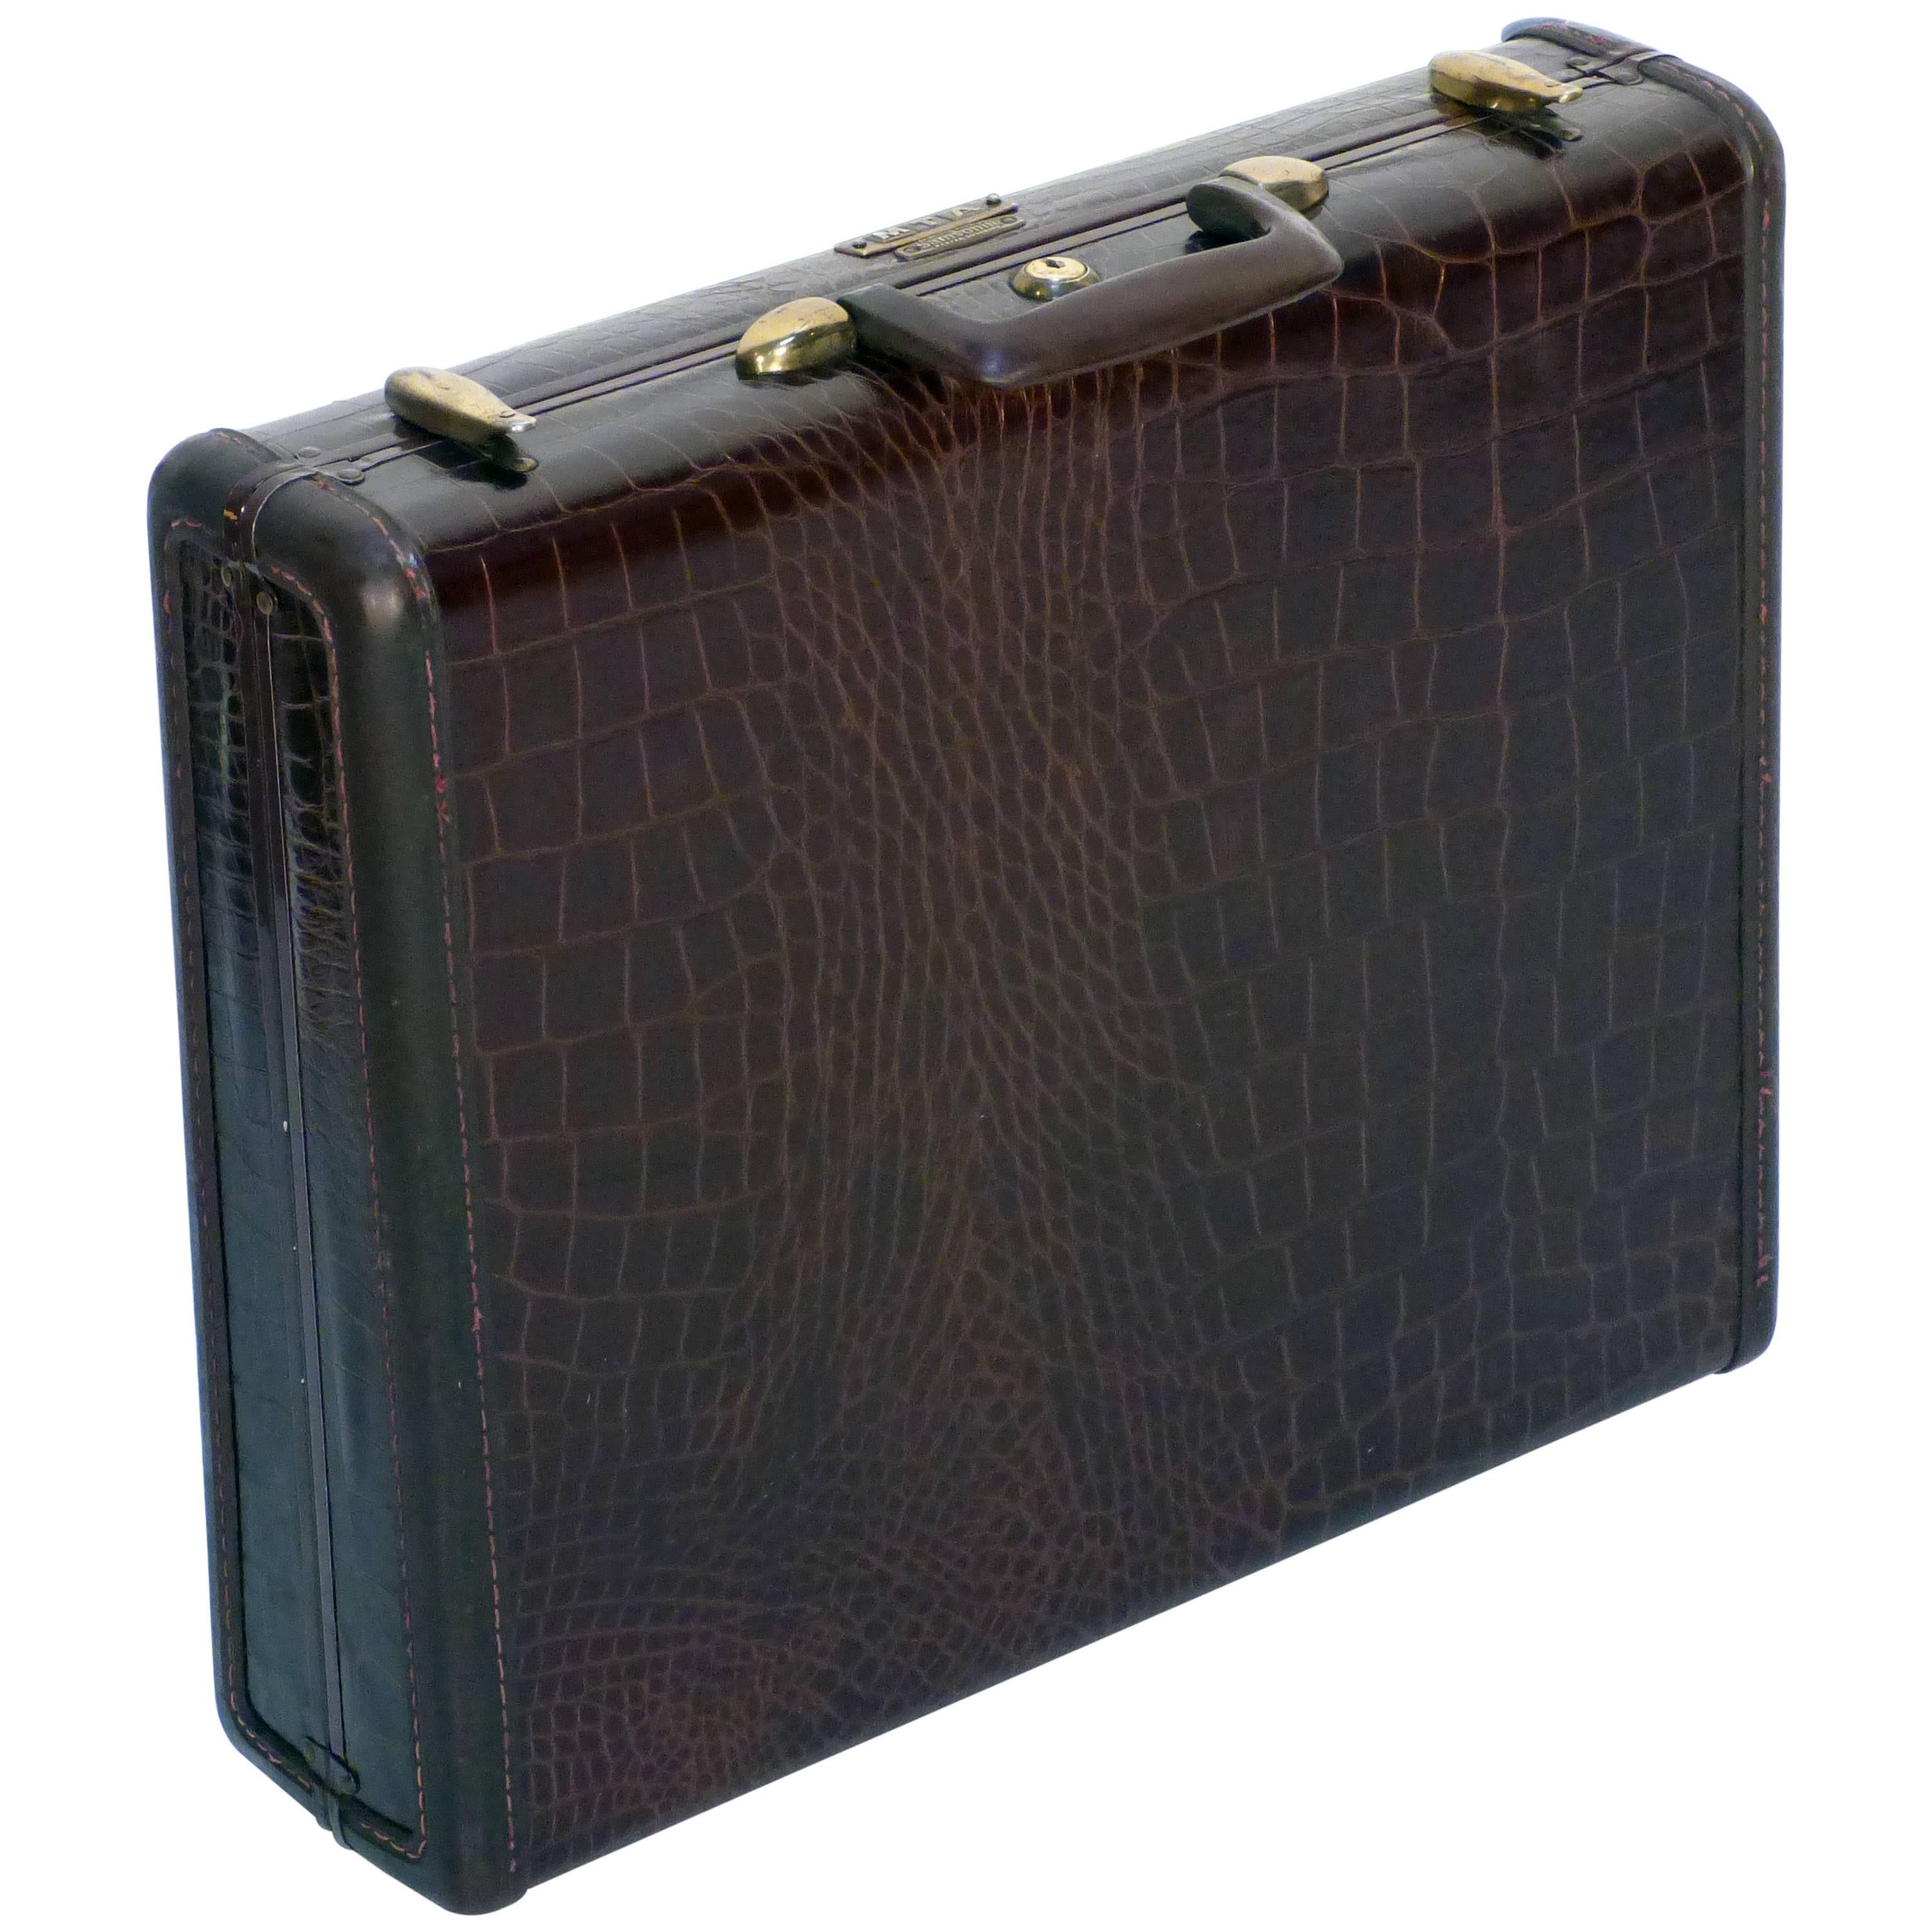 Samsonite Attache Crocodile-Embossed Leather Suitcase from 1950s For Sale